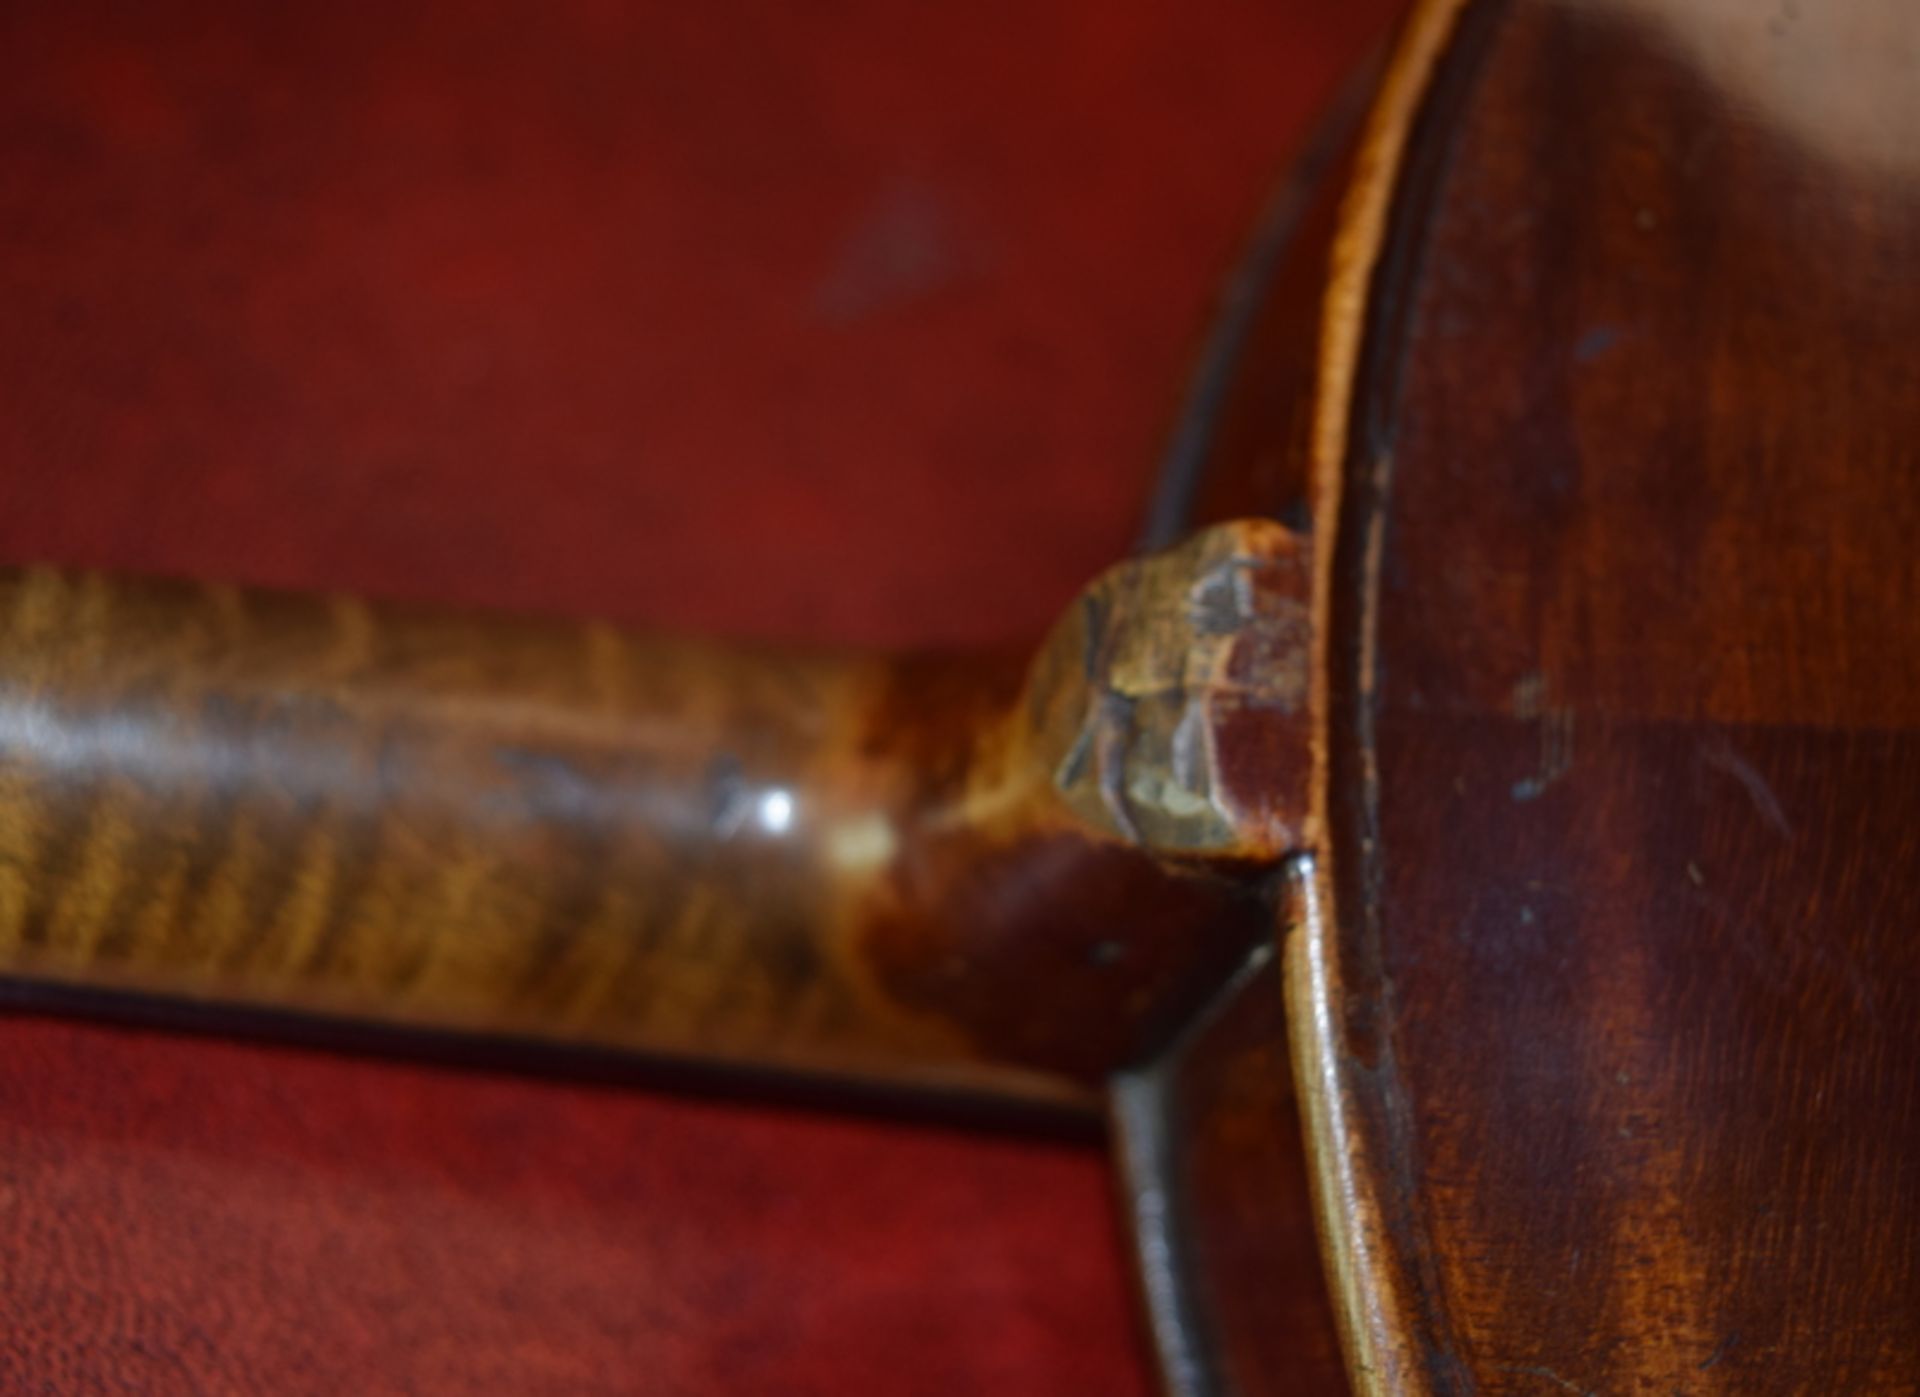 Nadi Jacobus Stainer Labeled Violin 1650 ***Reserve lowered 23.5.18*** - Image 8 of 8